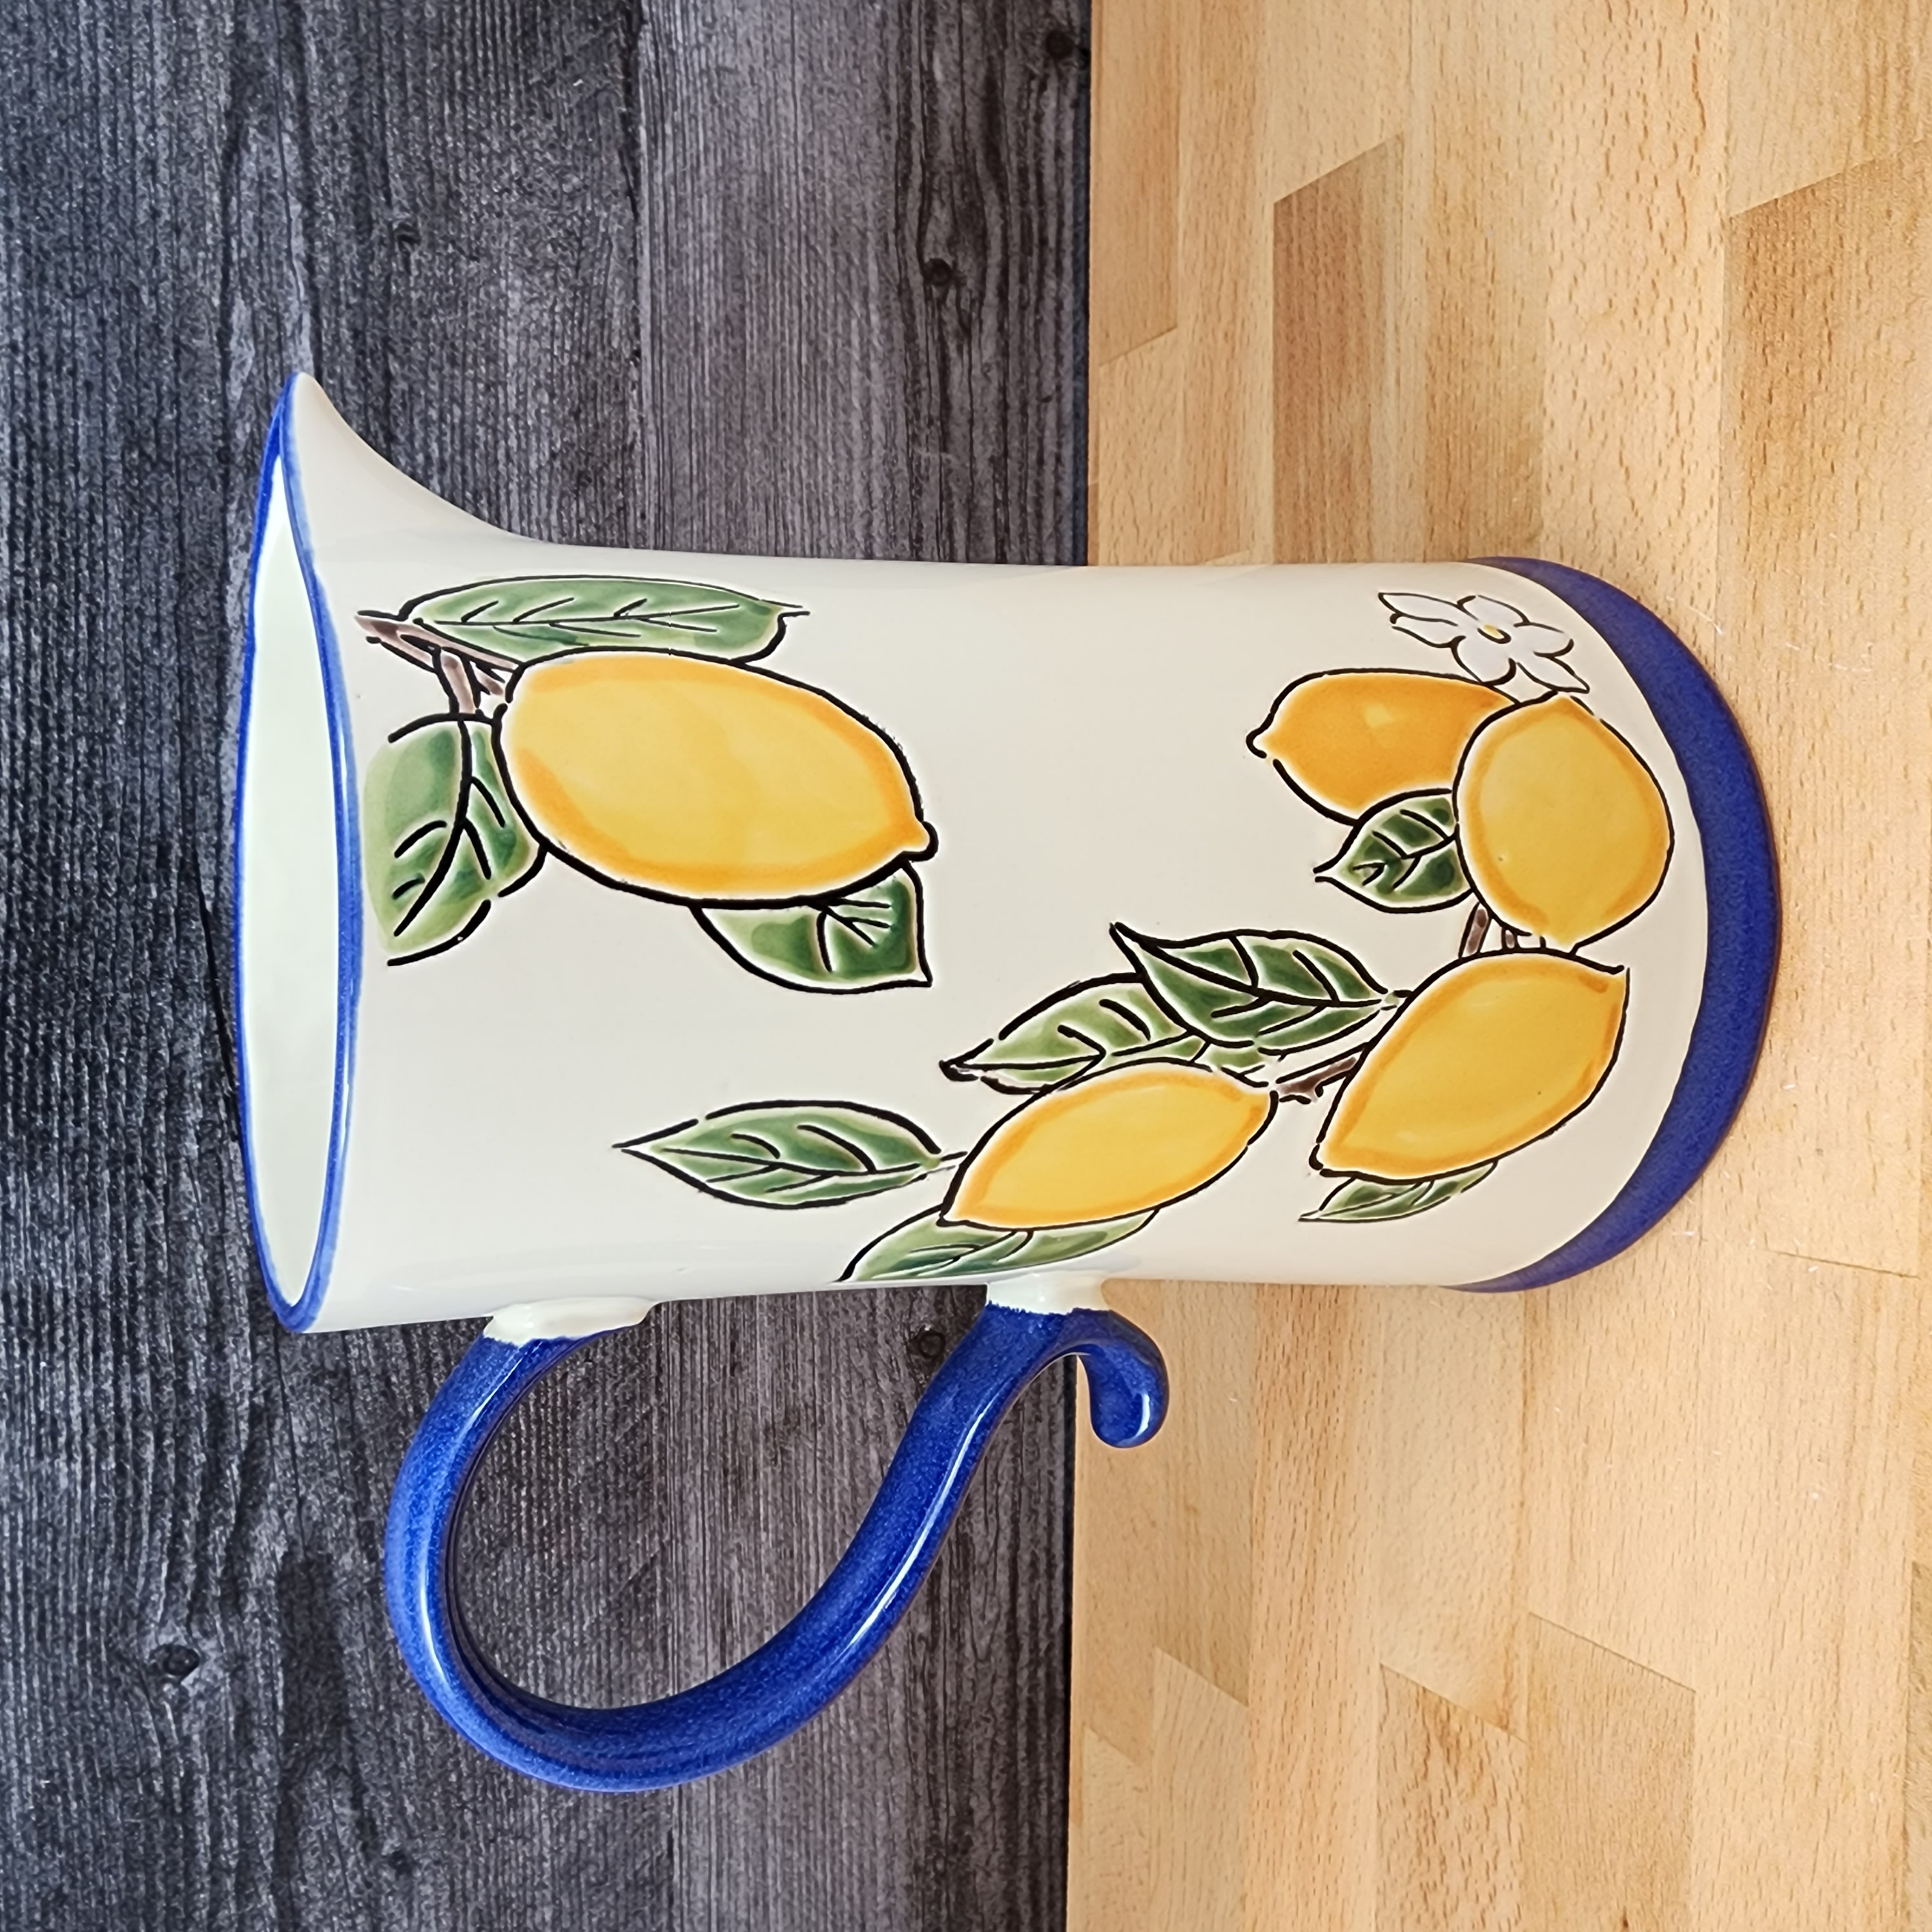 This Lemon Fruit Pitcher Embossed Decorative Floral Home by Blue Sky is made with love by Premier Homegoods! Shop more unique gift ideas today with Spots Initiatives, the best way to support creators.